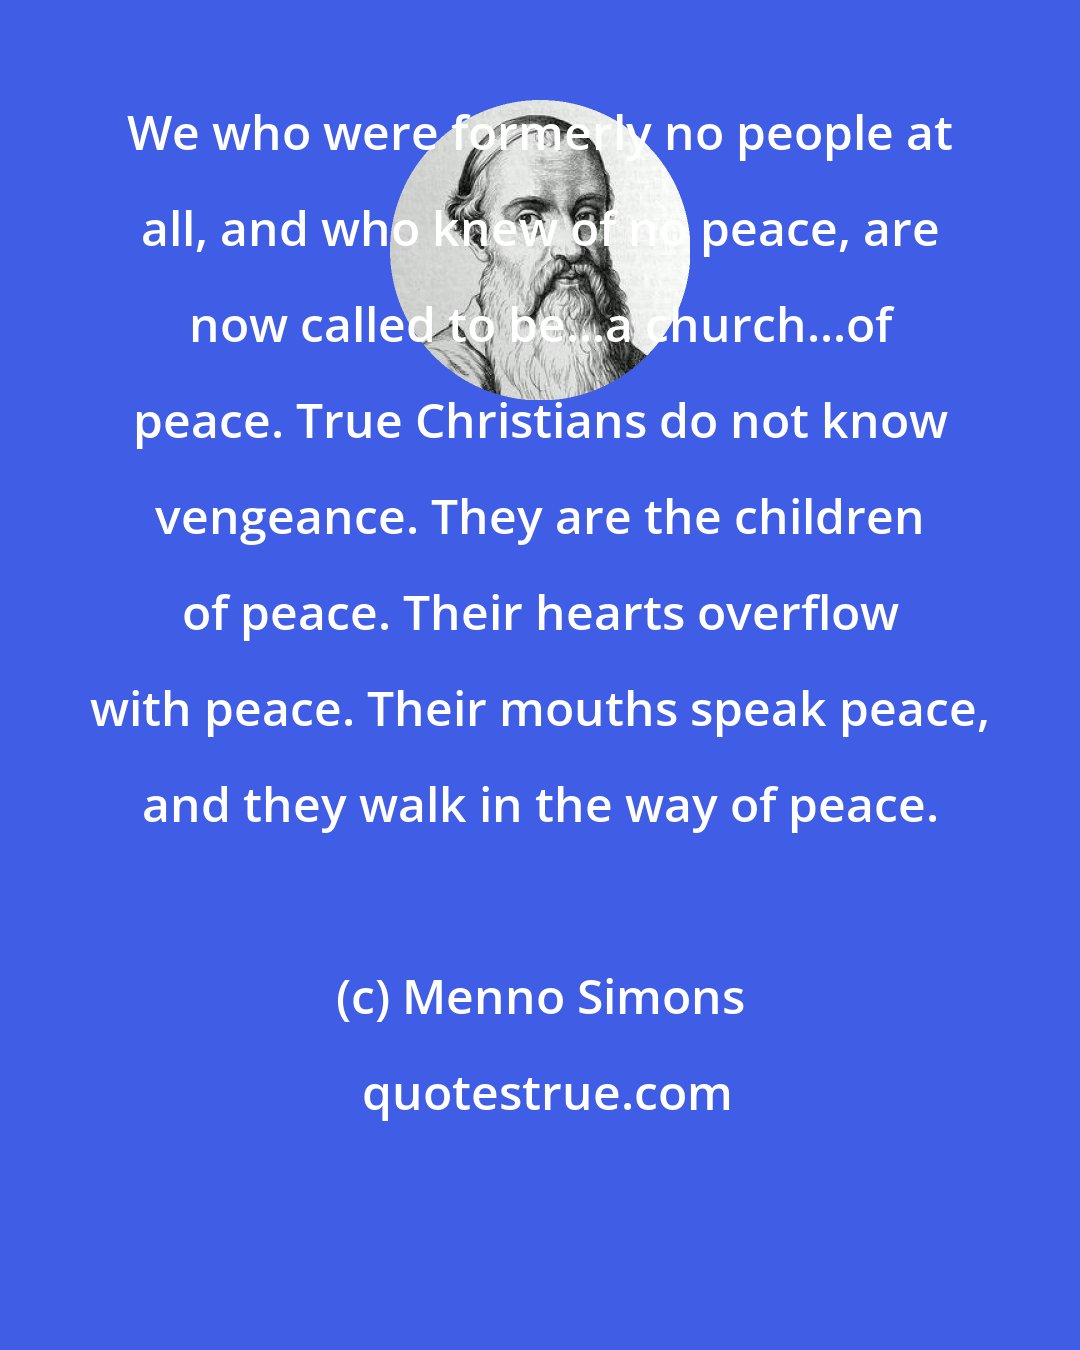 Menno Simons: We who were formerly no people at all, and who knew of no peace, are now called to be...a church...of peace. True Christians do not know vengeance. They are the children of peace. Their hearts overflow with peace. Their mouths speak peace, and they walk in the way of peace.